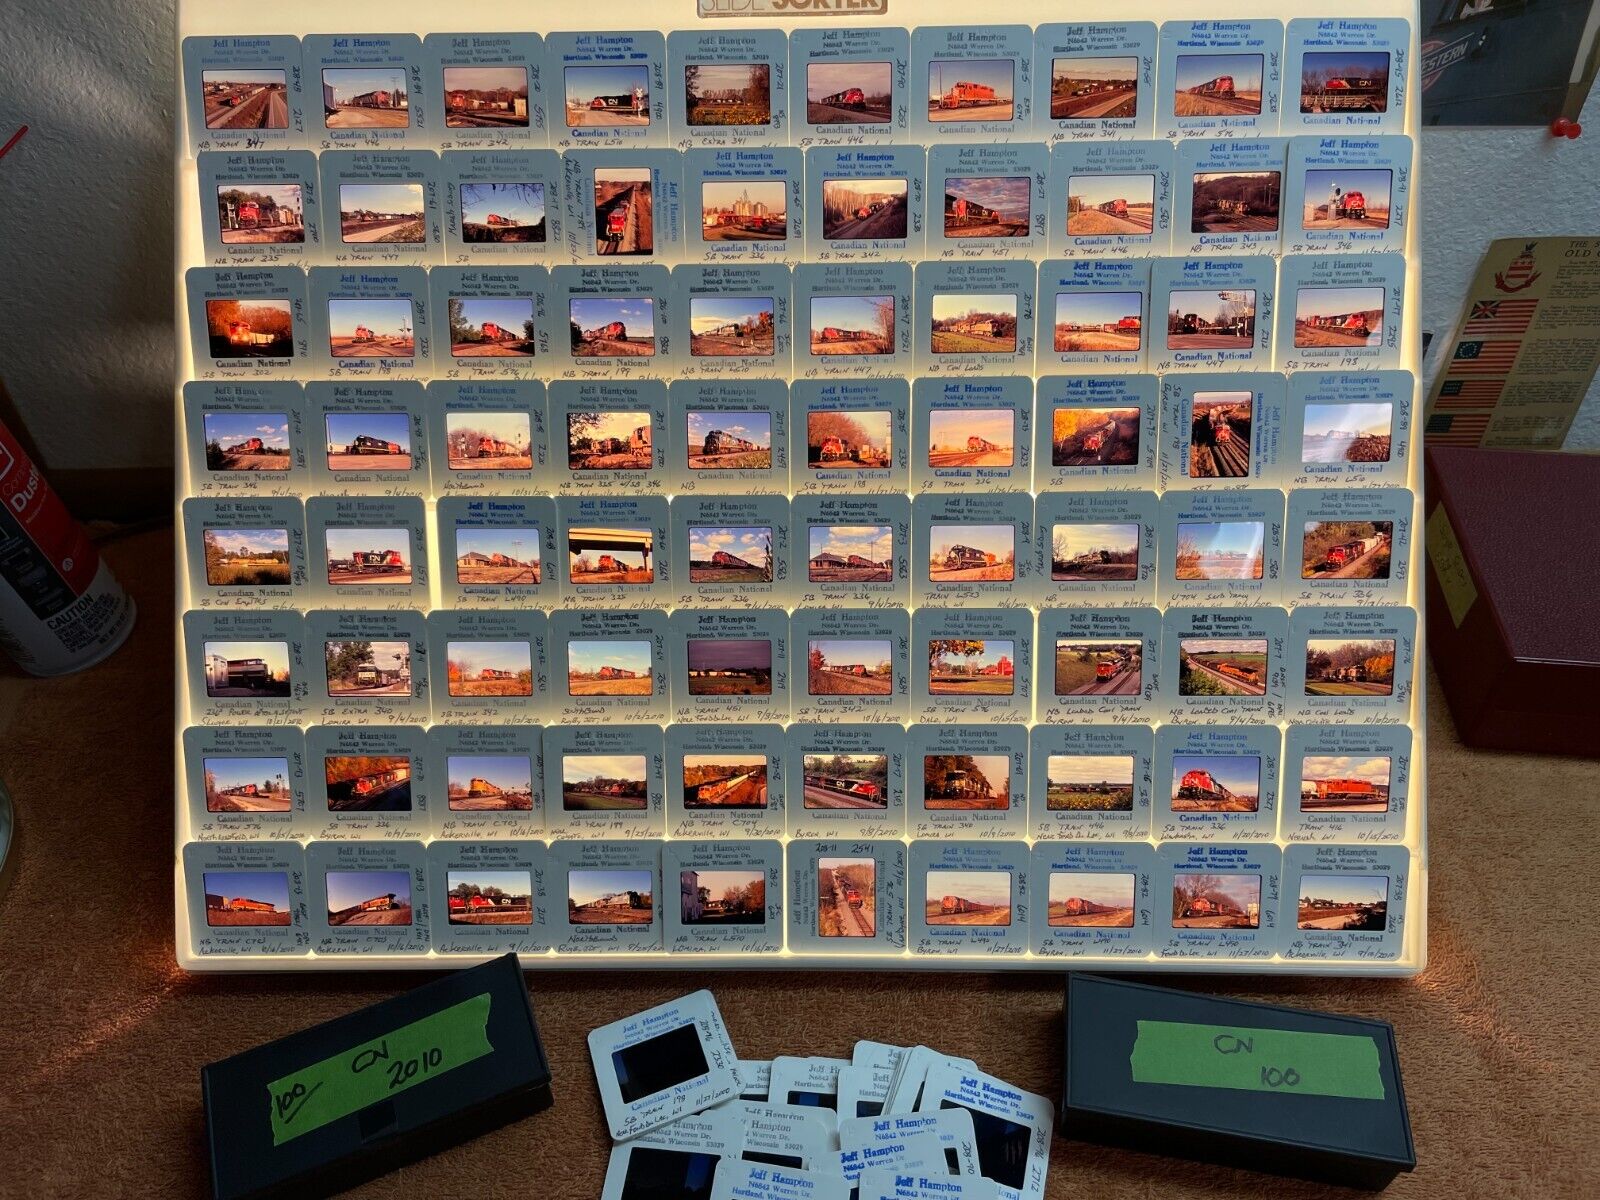 Canadian National Railroad - Bulk Lot of 100 color slides from the year 2010